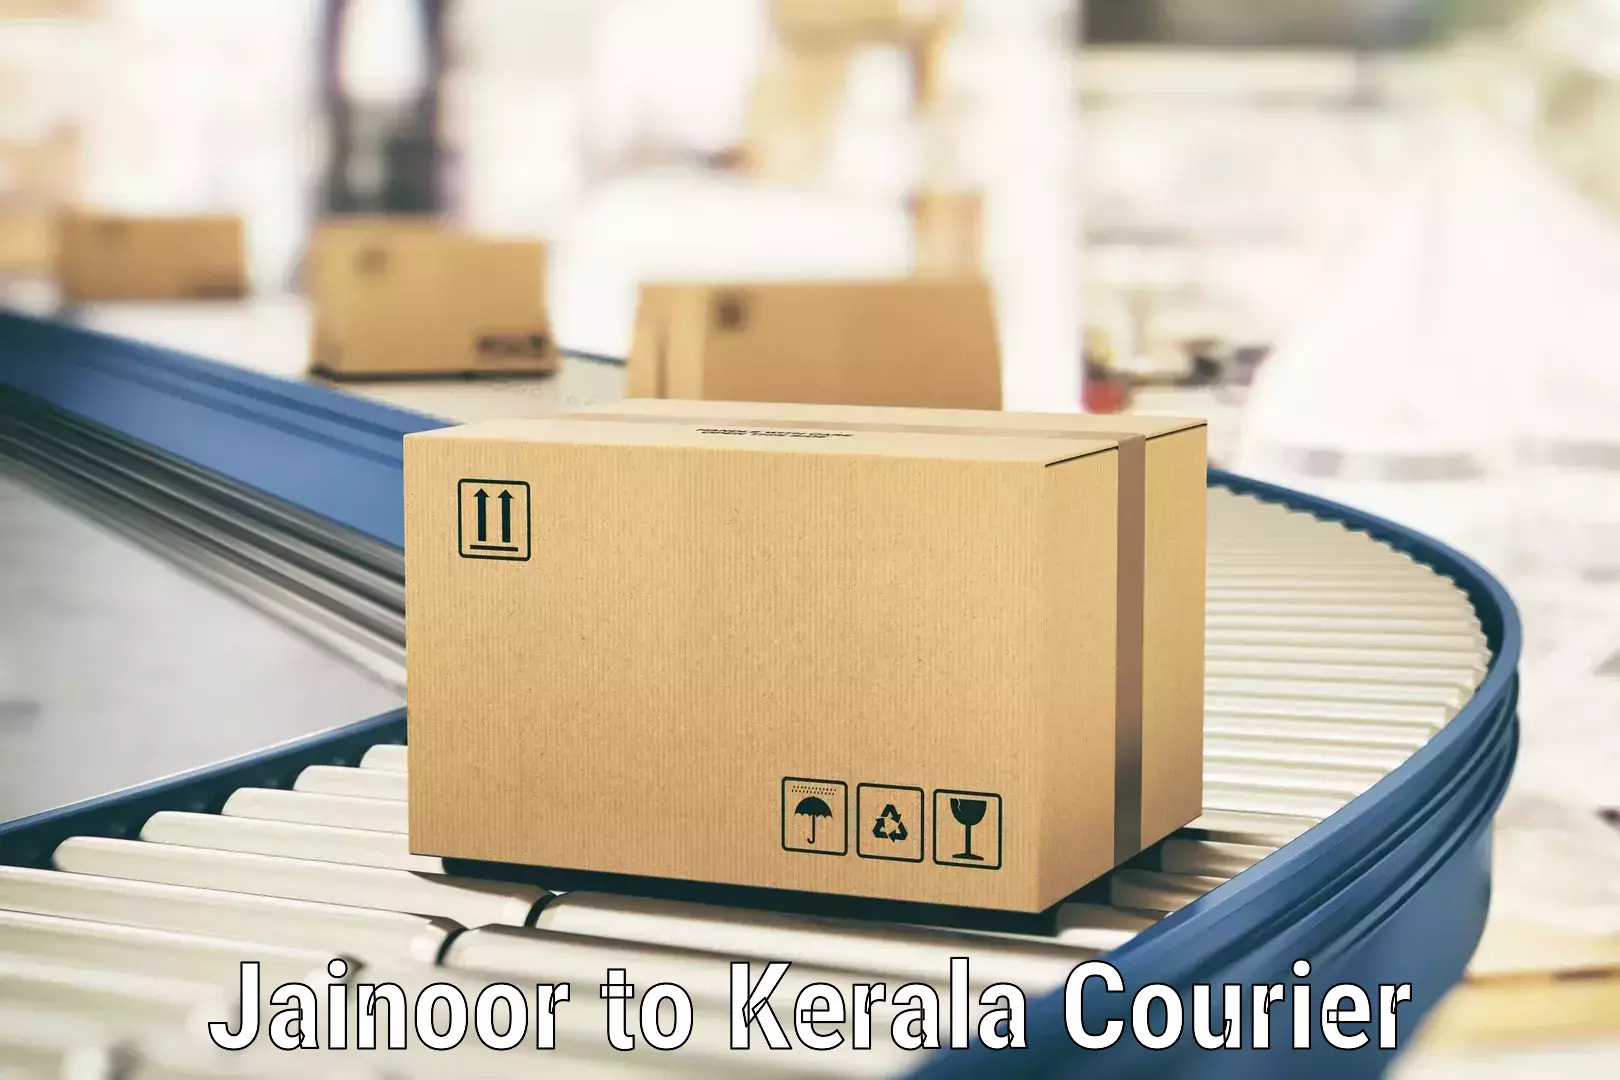 Quality courier services Jainoor to Kannur